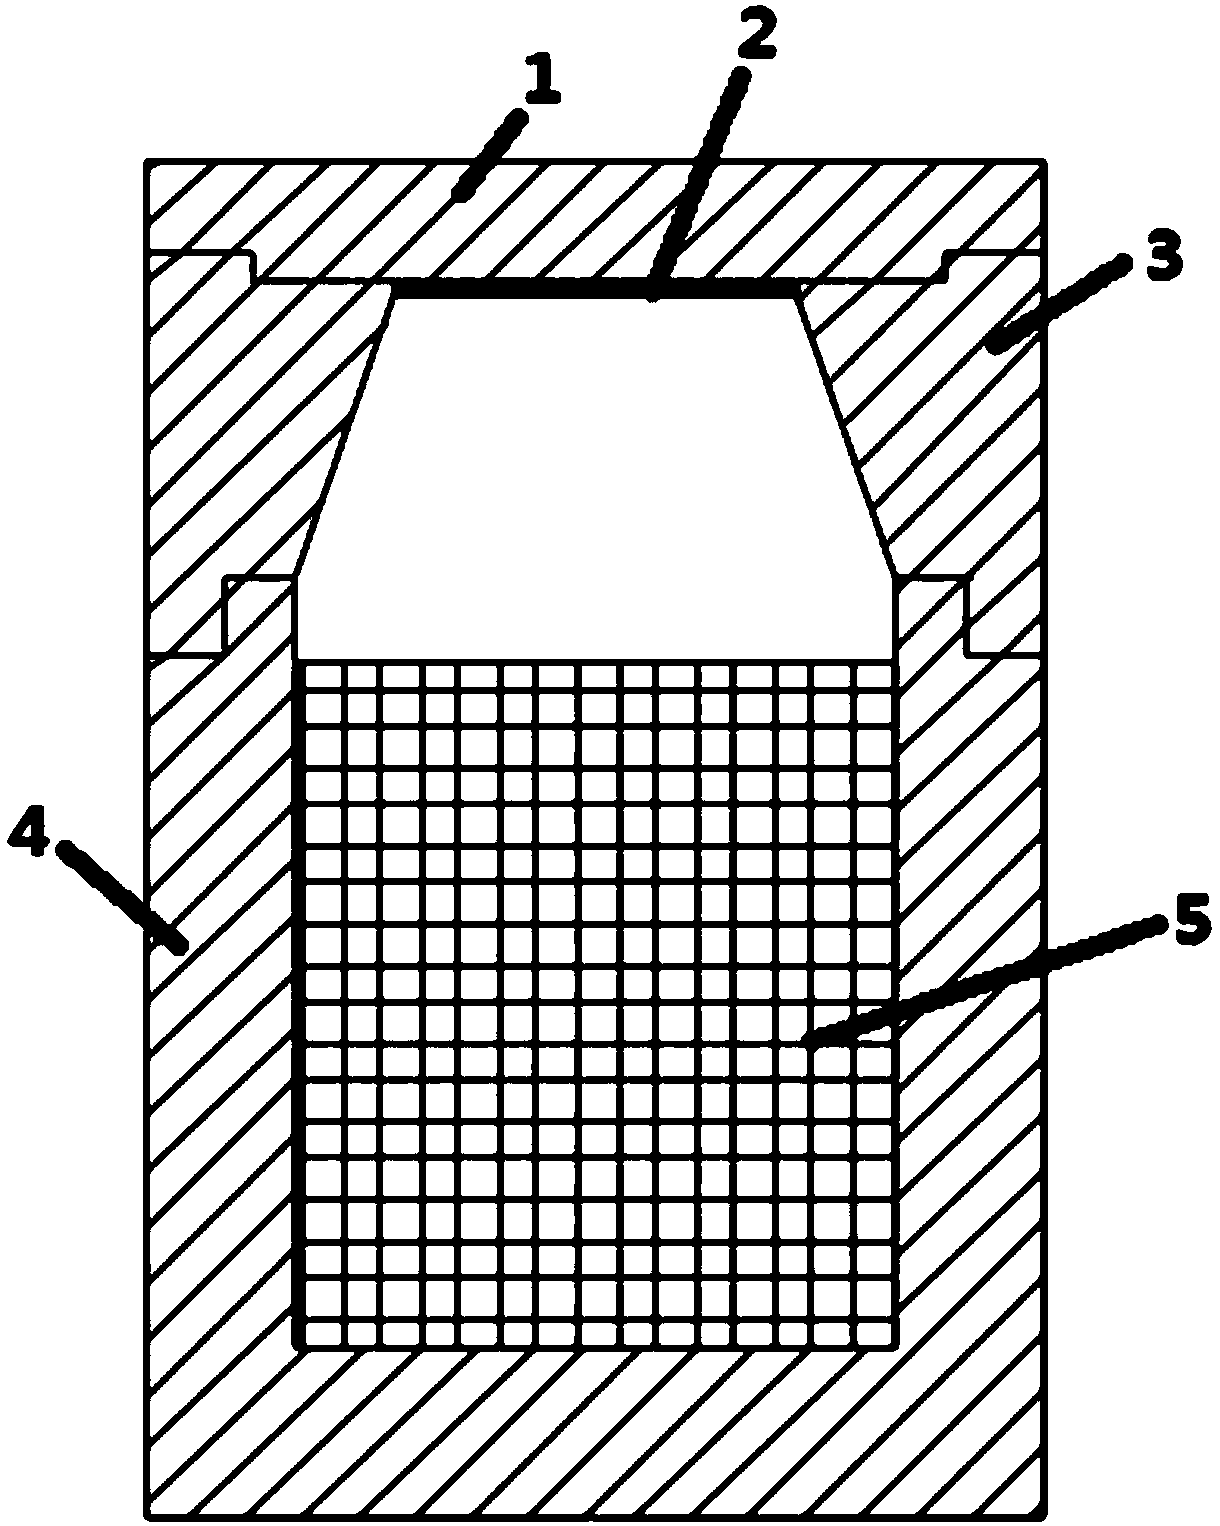 Graphite crucible for increasing growth length of silicon-carbide crystal